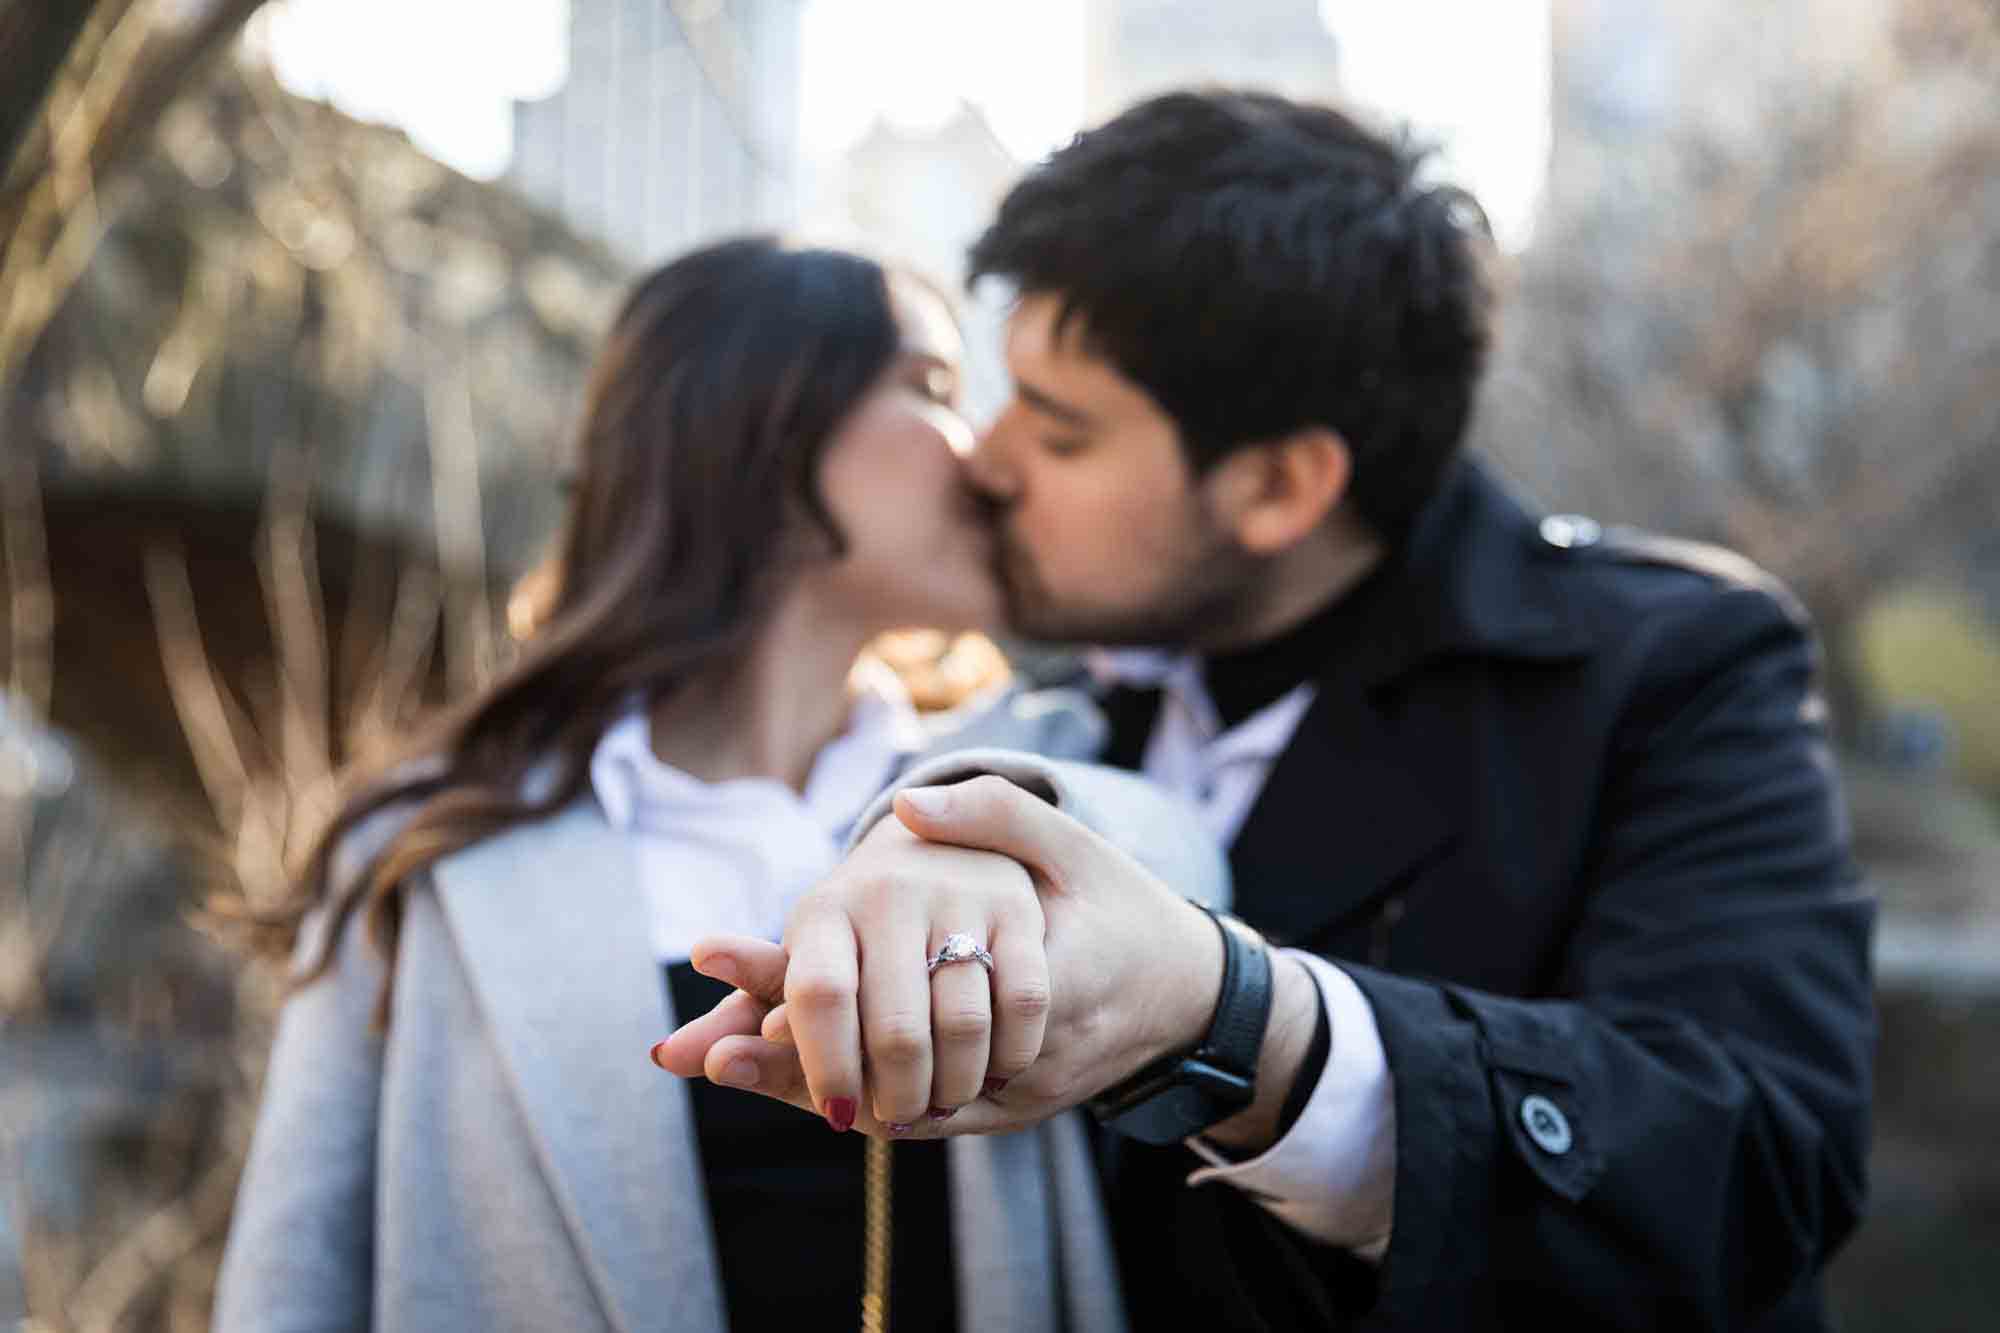 Couple kissing while hand outstretched showing engagement ring during a Central Park surprise proposal